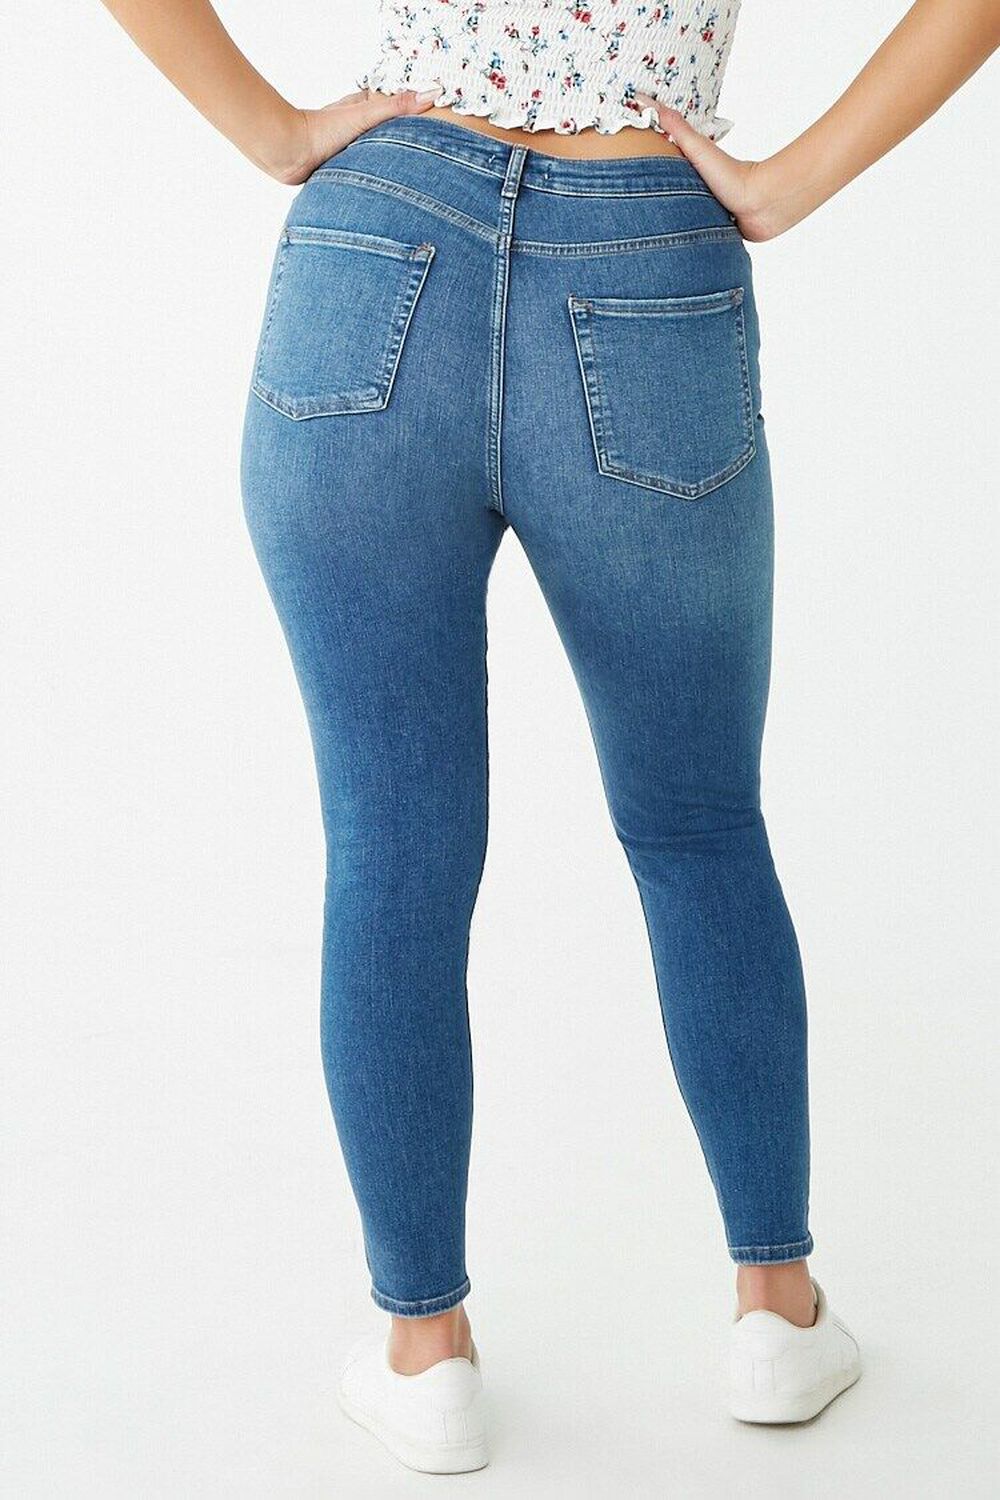 Sculpted High-Rise Skinny Jeans